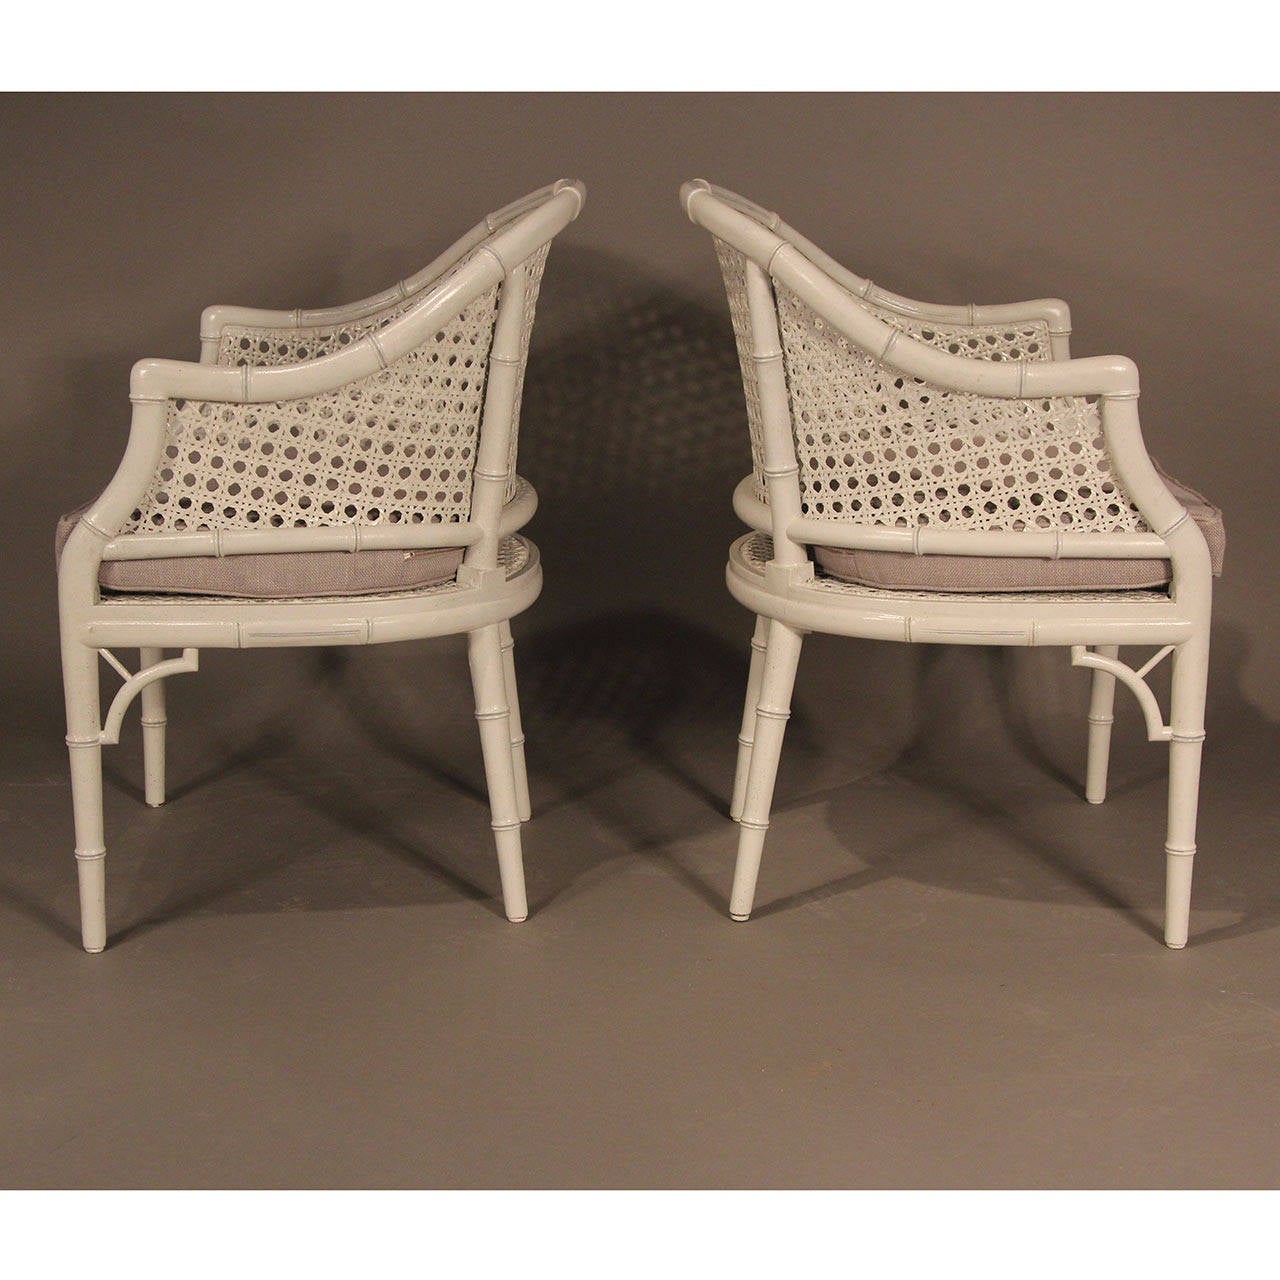 Mid-20th Century Faux Bamboo Mid-Century Painted and Caned Chairs For Sale